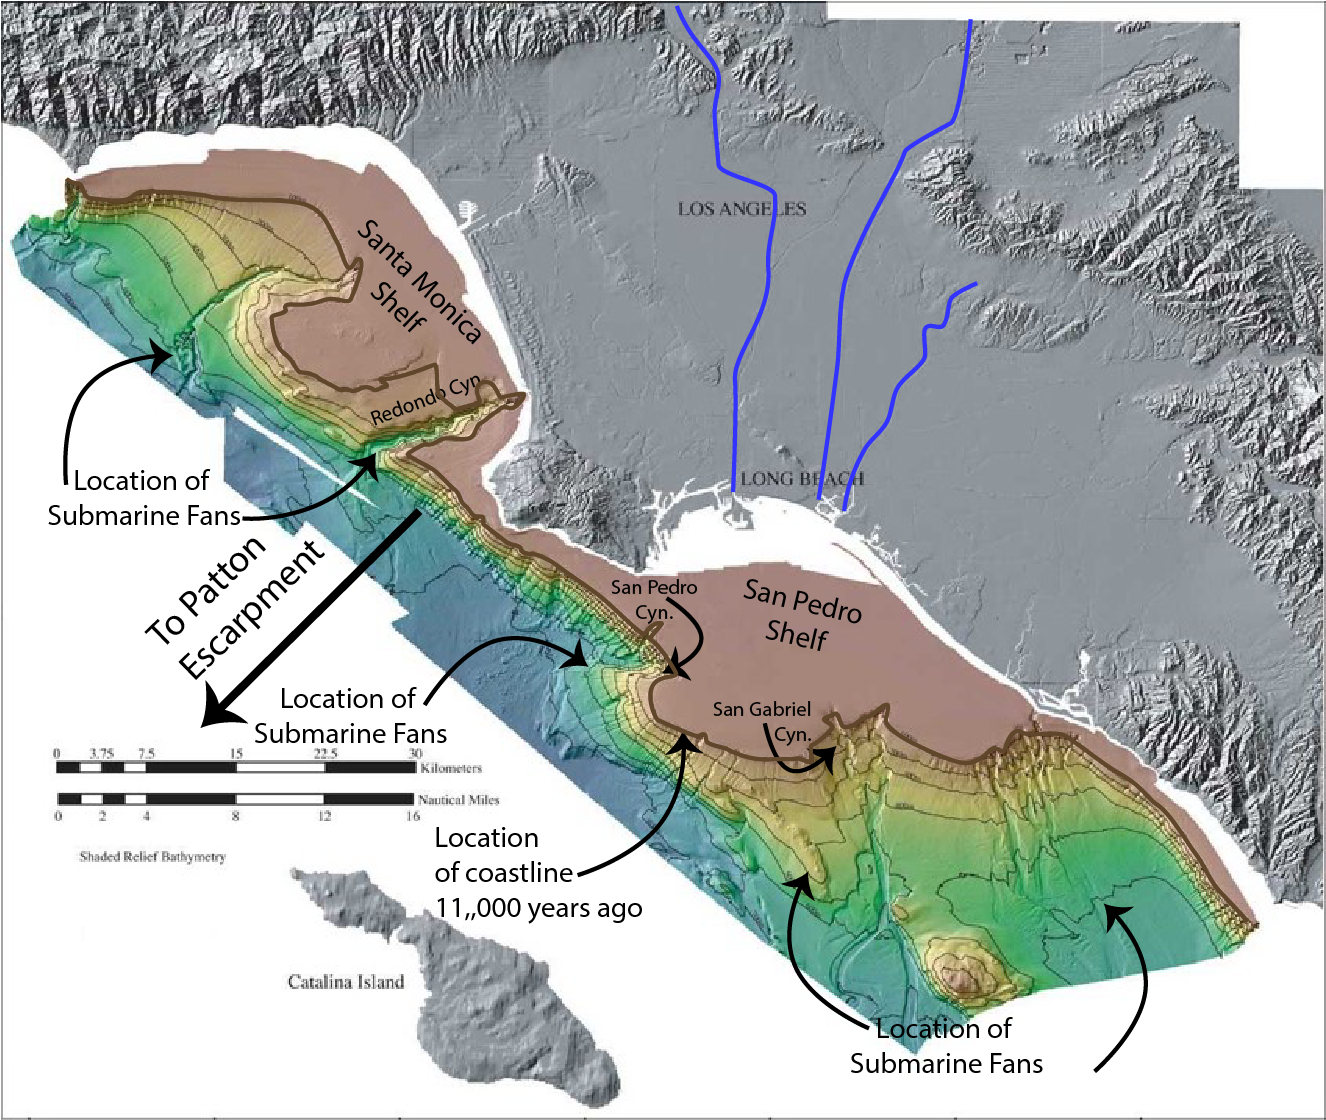 Color-coded shaded relief bathymetry of the Los Angeles, California Margin. 